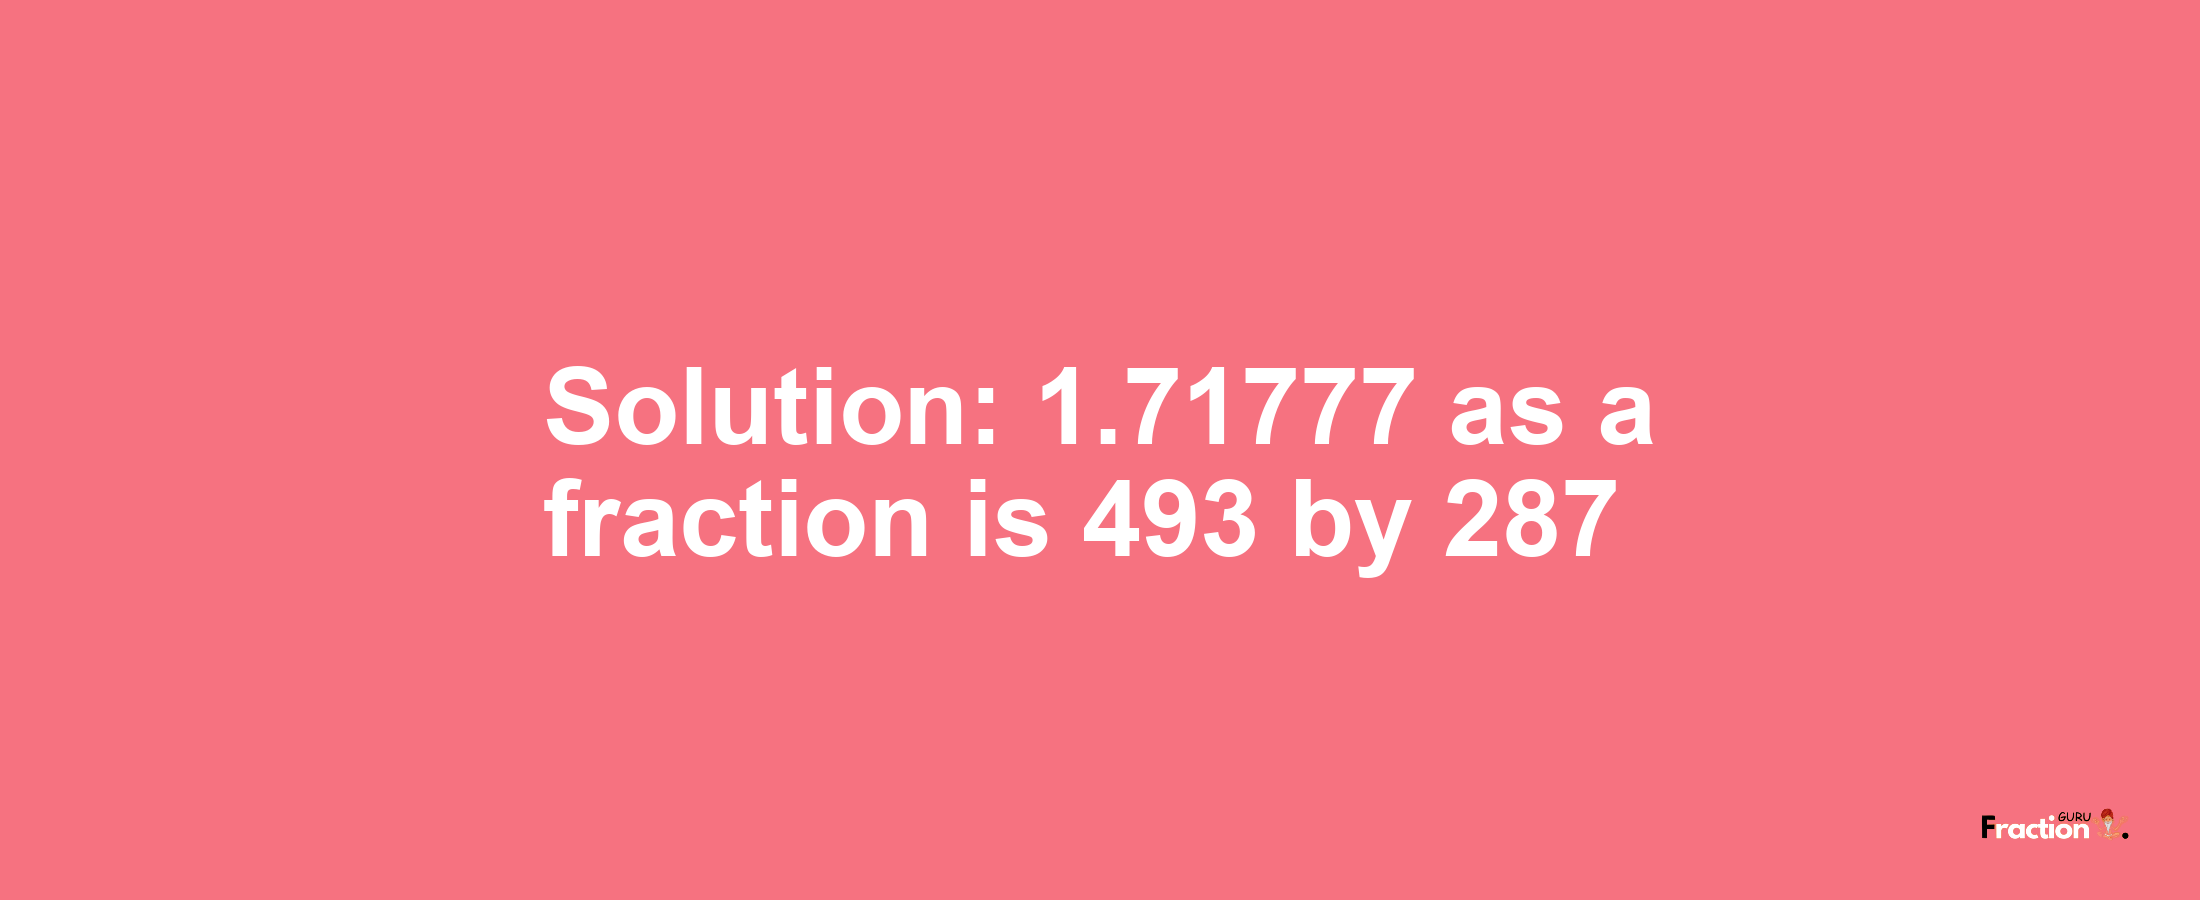 Solution:1.71777 as a fraction is 493/287